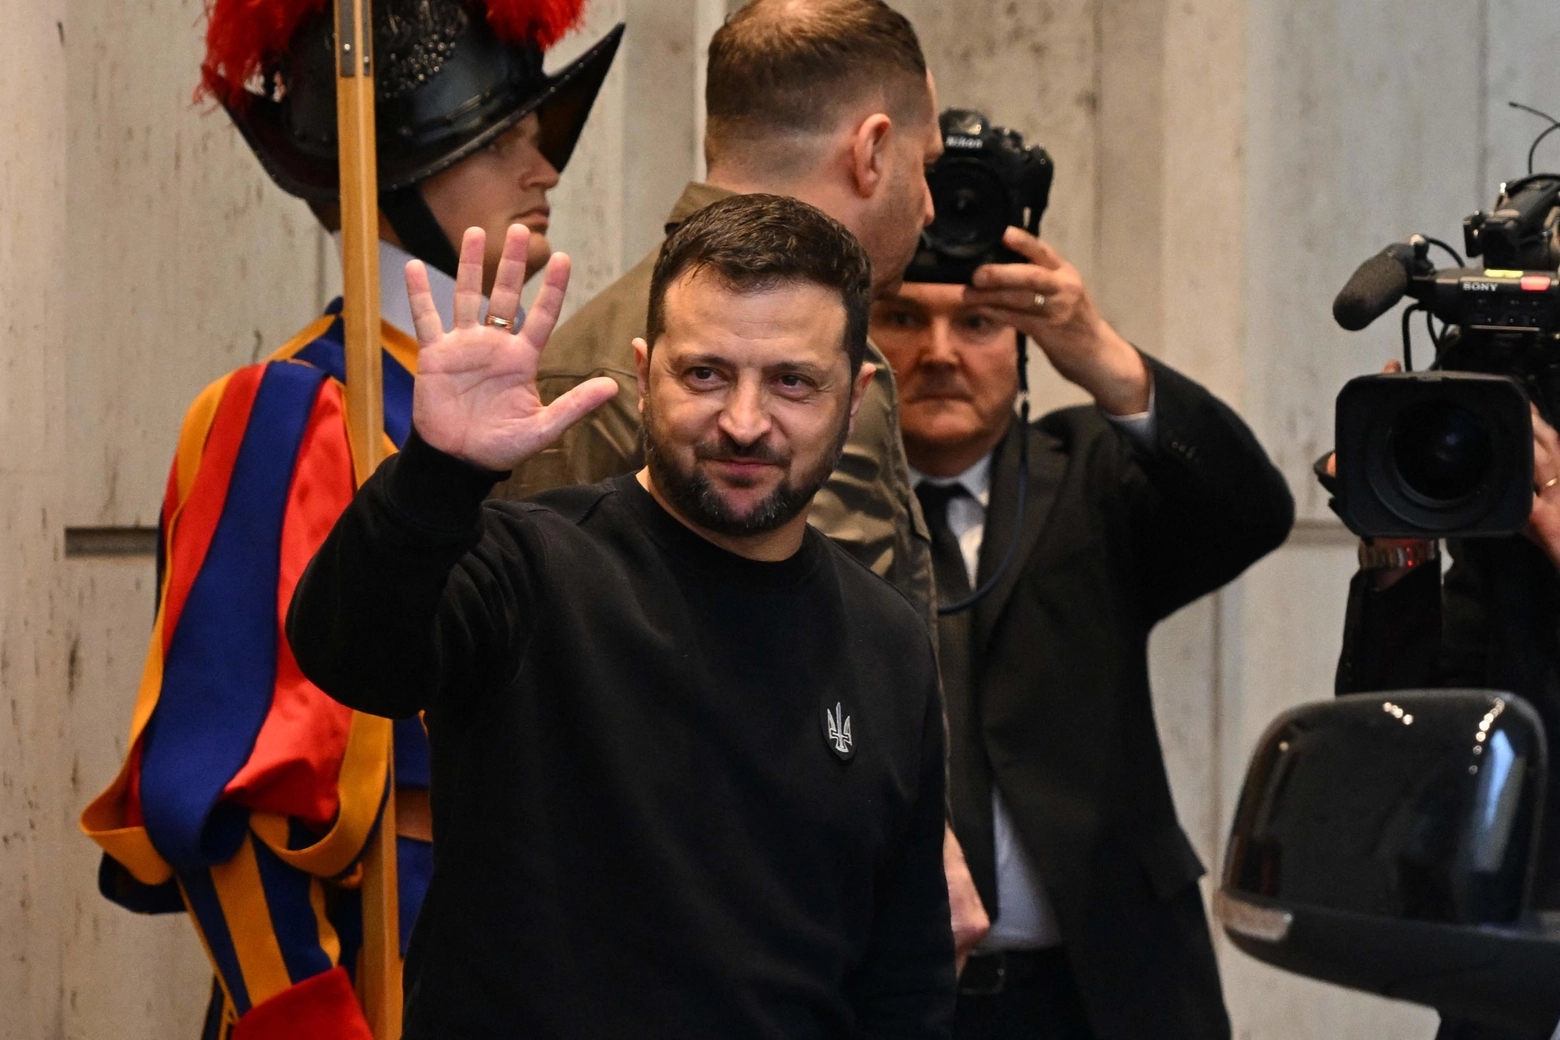 Ukrainian President Volodymyr Zelensky waves as he leaves following a private audience with the Pope on May 13, 2023 in The Vatican. Ukrainian President Volodymyr Zelensky arrived in Rome on May 13 for meetings with President of Italy Sergio Mattarella, Prime Minister Giorgia Meloni and Pope Francis in his first visit to Italy since Russia's invasion. (Photo by Andreas SOLARO / AFP)